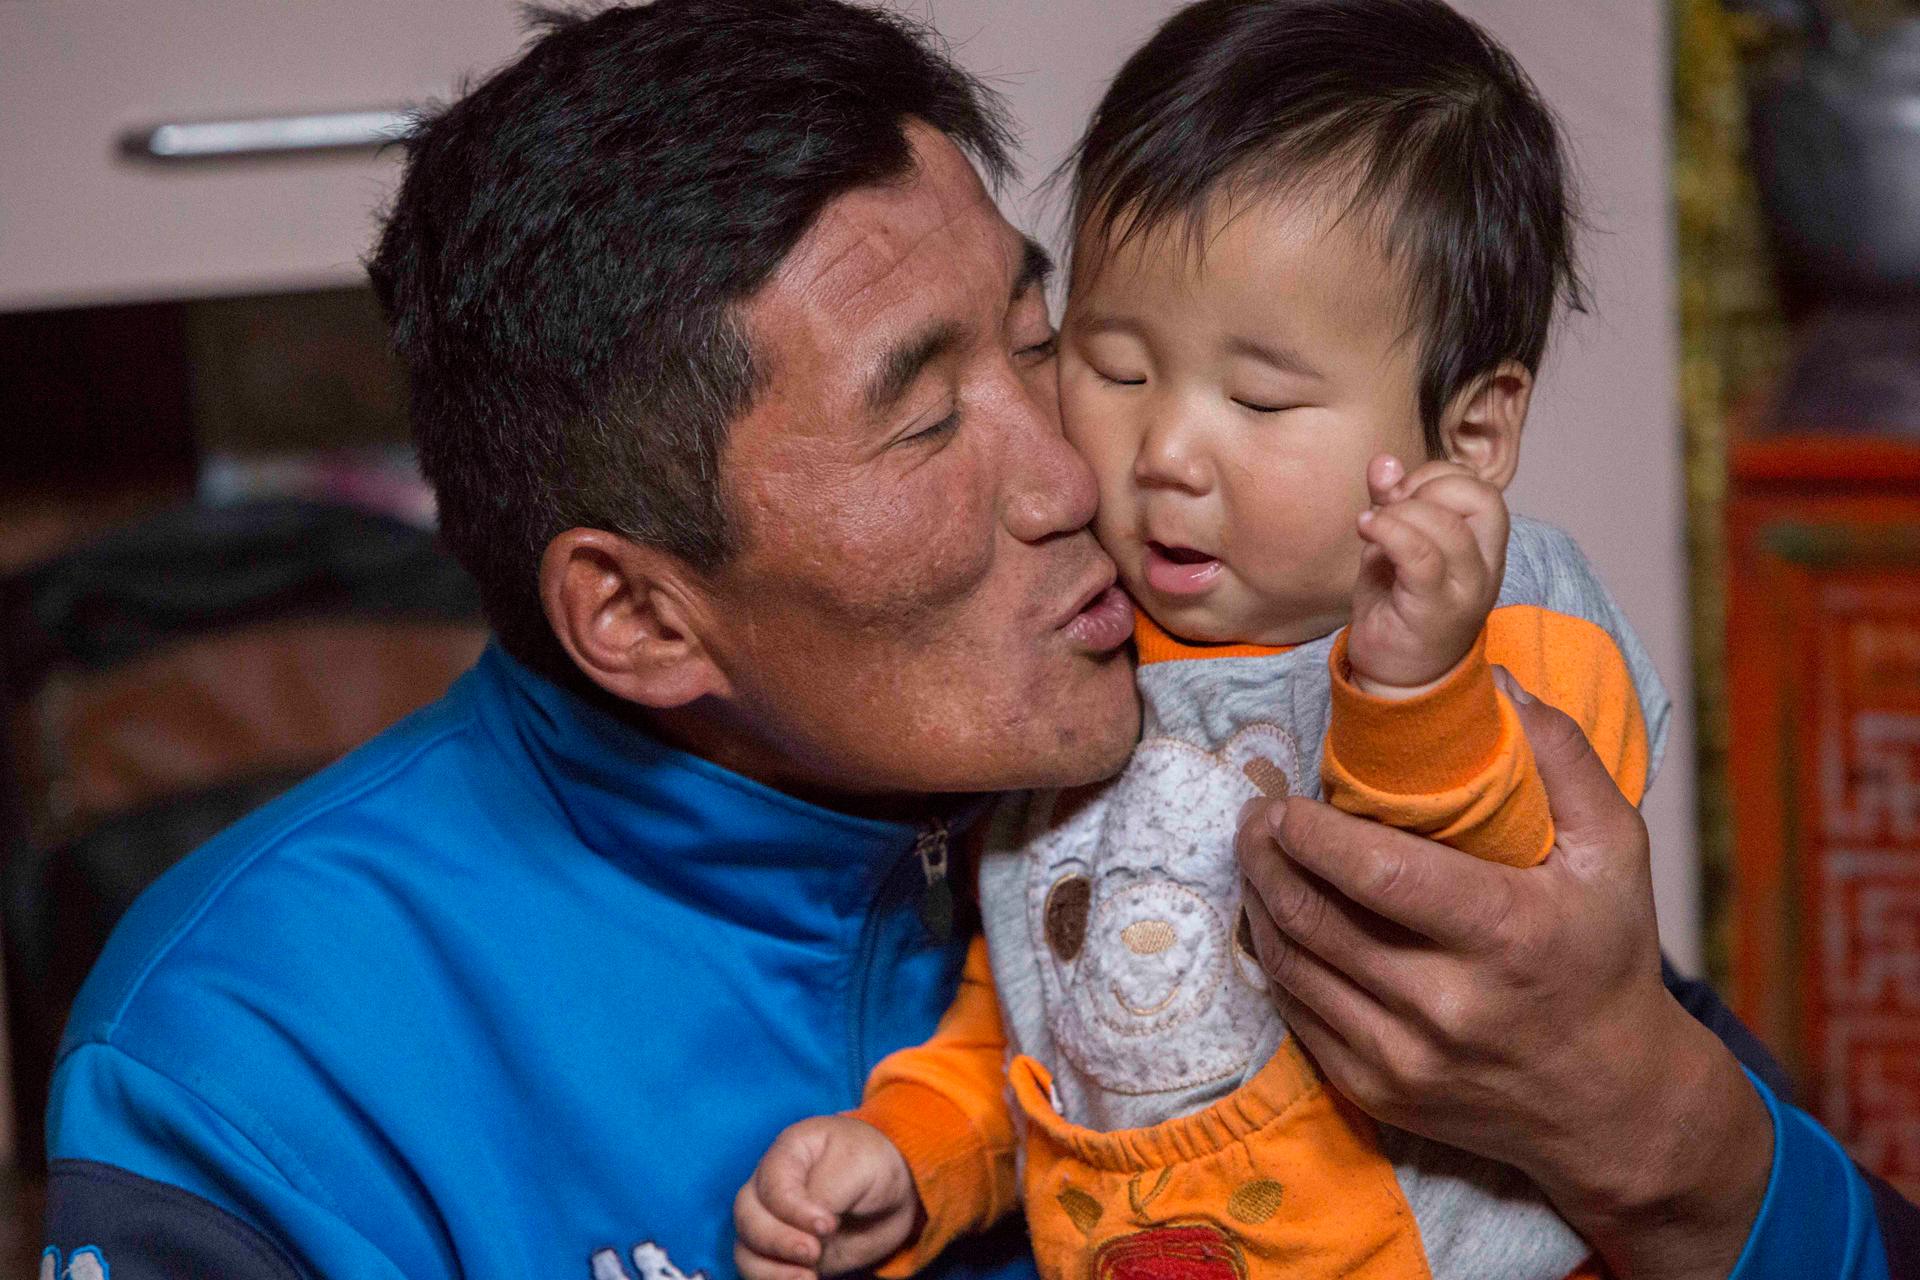 Jargalsaikhan Erdene-Bayar holds his eight-month-old son Munkh-erdene inside his family’s ger in Ulaanbaatar. Erdene-Bayar herded livestock in the countryside until a harsh winter killed most of his animals and forced him to look for work in the city.